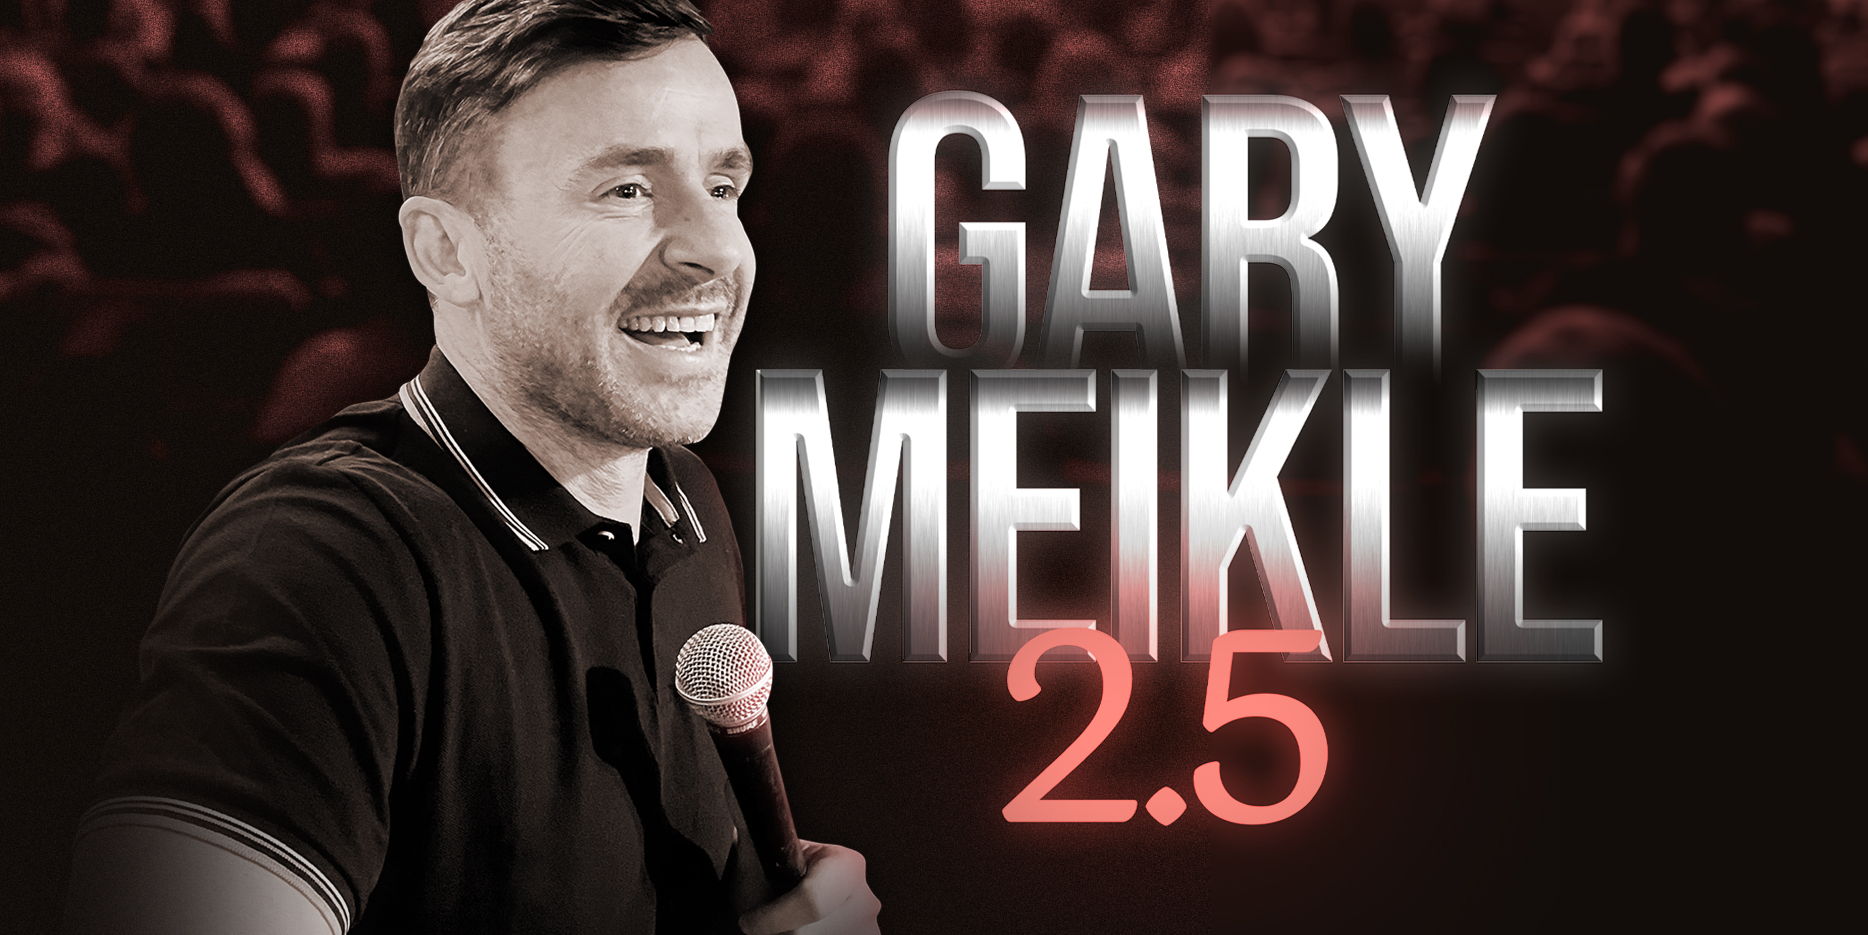 Gary Meikle 2.5  promotional image